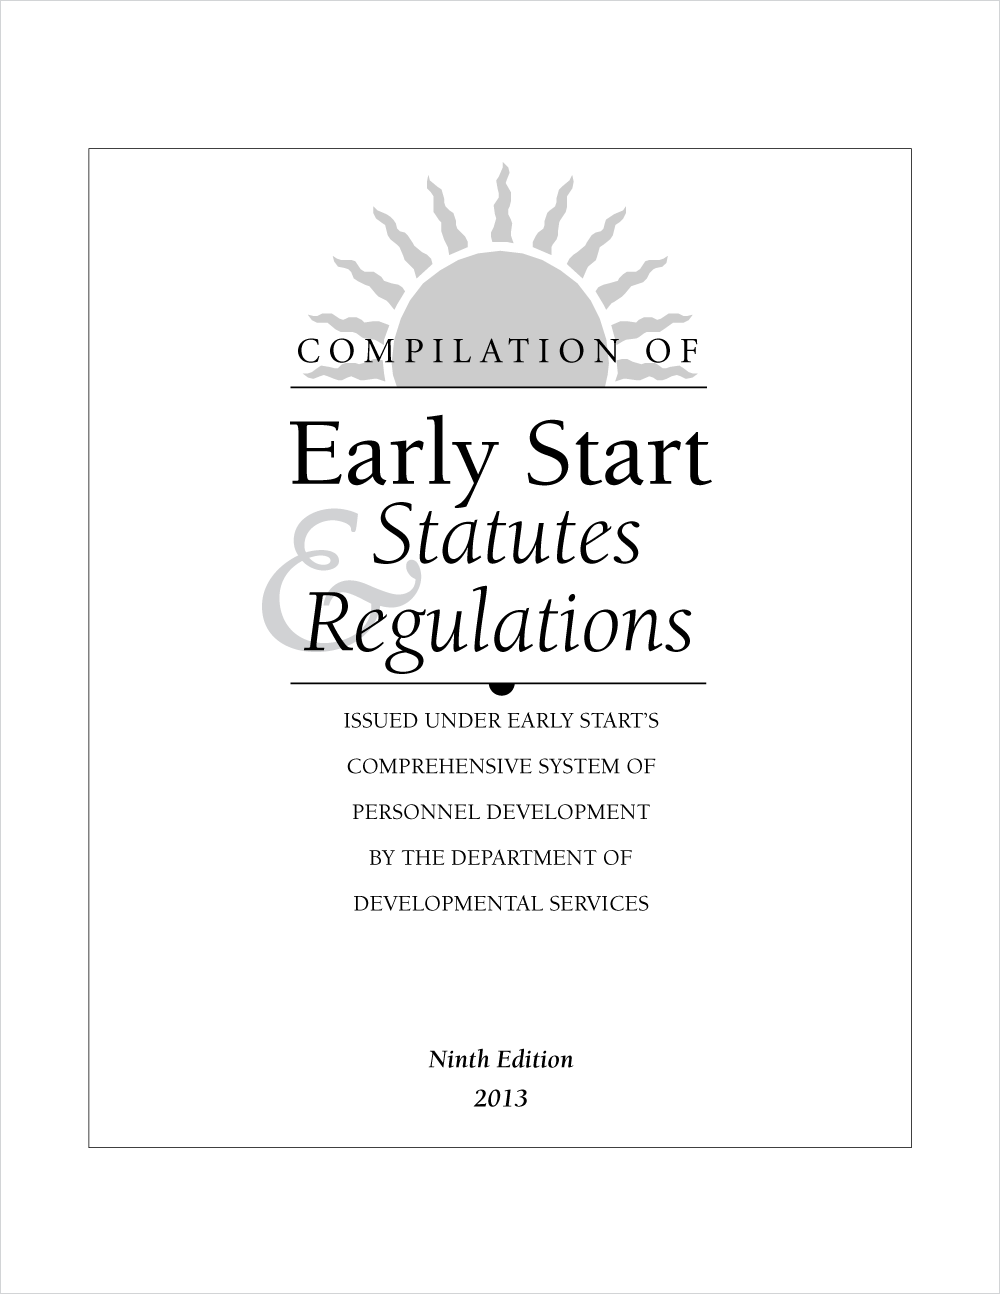 Cover image of Compilation of Early Start Statutes and Regulations